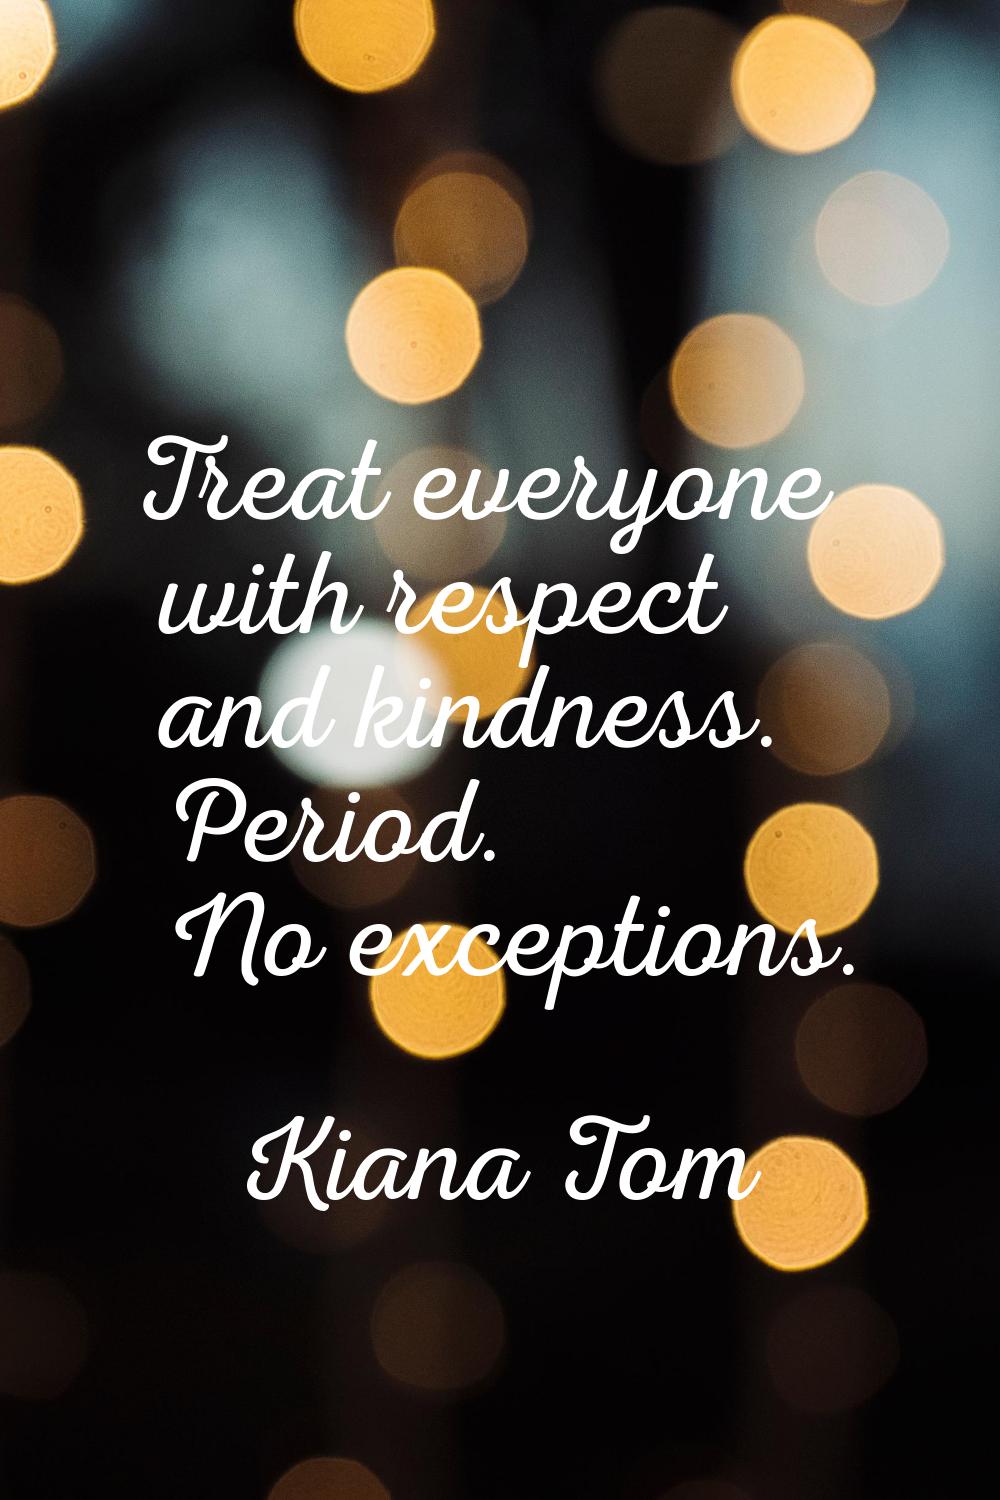 Treat everyone with respect and kindness. Period. No exceptions.